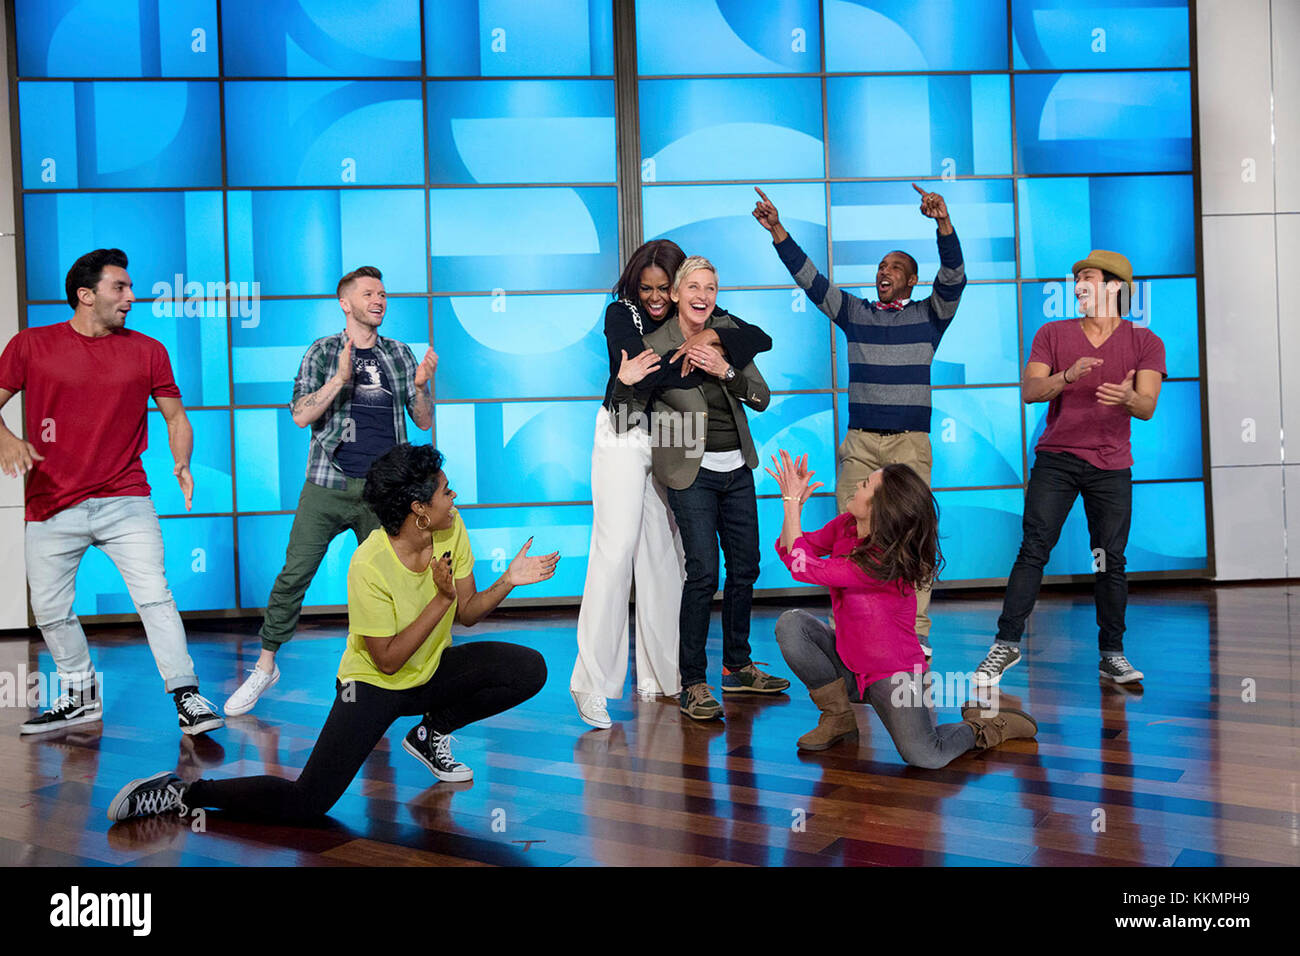 First Lady Michelle Obama hugs Ellen DeGeneres after they perform a #GimmeFive 'Let's Move!' dance with the 'So You Think You Can Dance' dancers during a taping of The Ellen DeGeneres Show in Burbank, Calif., March 12, 2015. (Official White House Photo by Amanda Lucidon)  This official White House photograph is being made available only for publication by news organizations and/or for personal use printing by the subject(s) of the photograph. The photograph may not be manipulated in any way and may not be used in commercial or political materials, advertisements, emails, products, promotions t Stock Photo